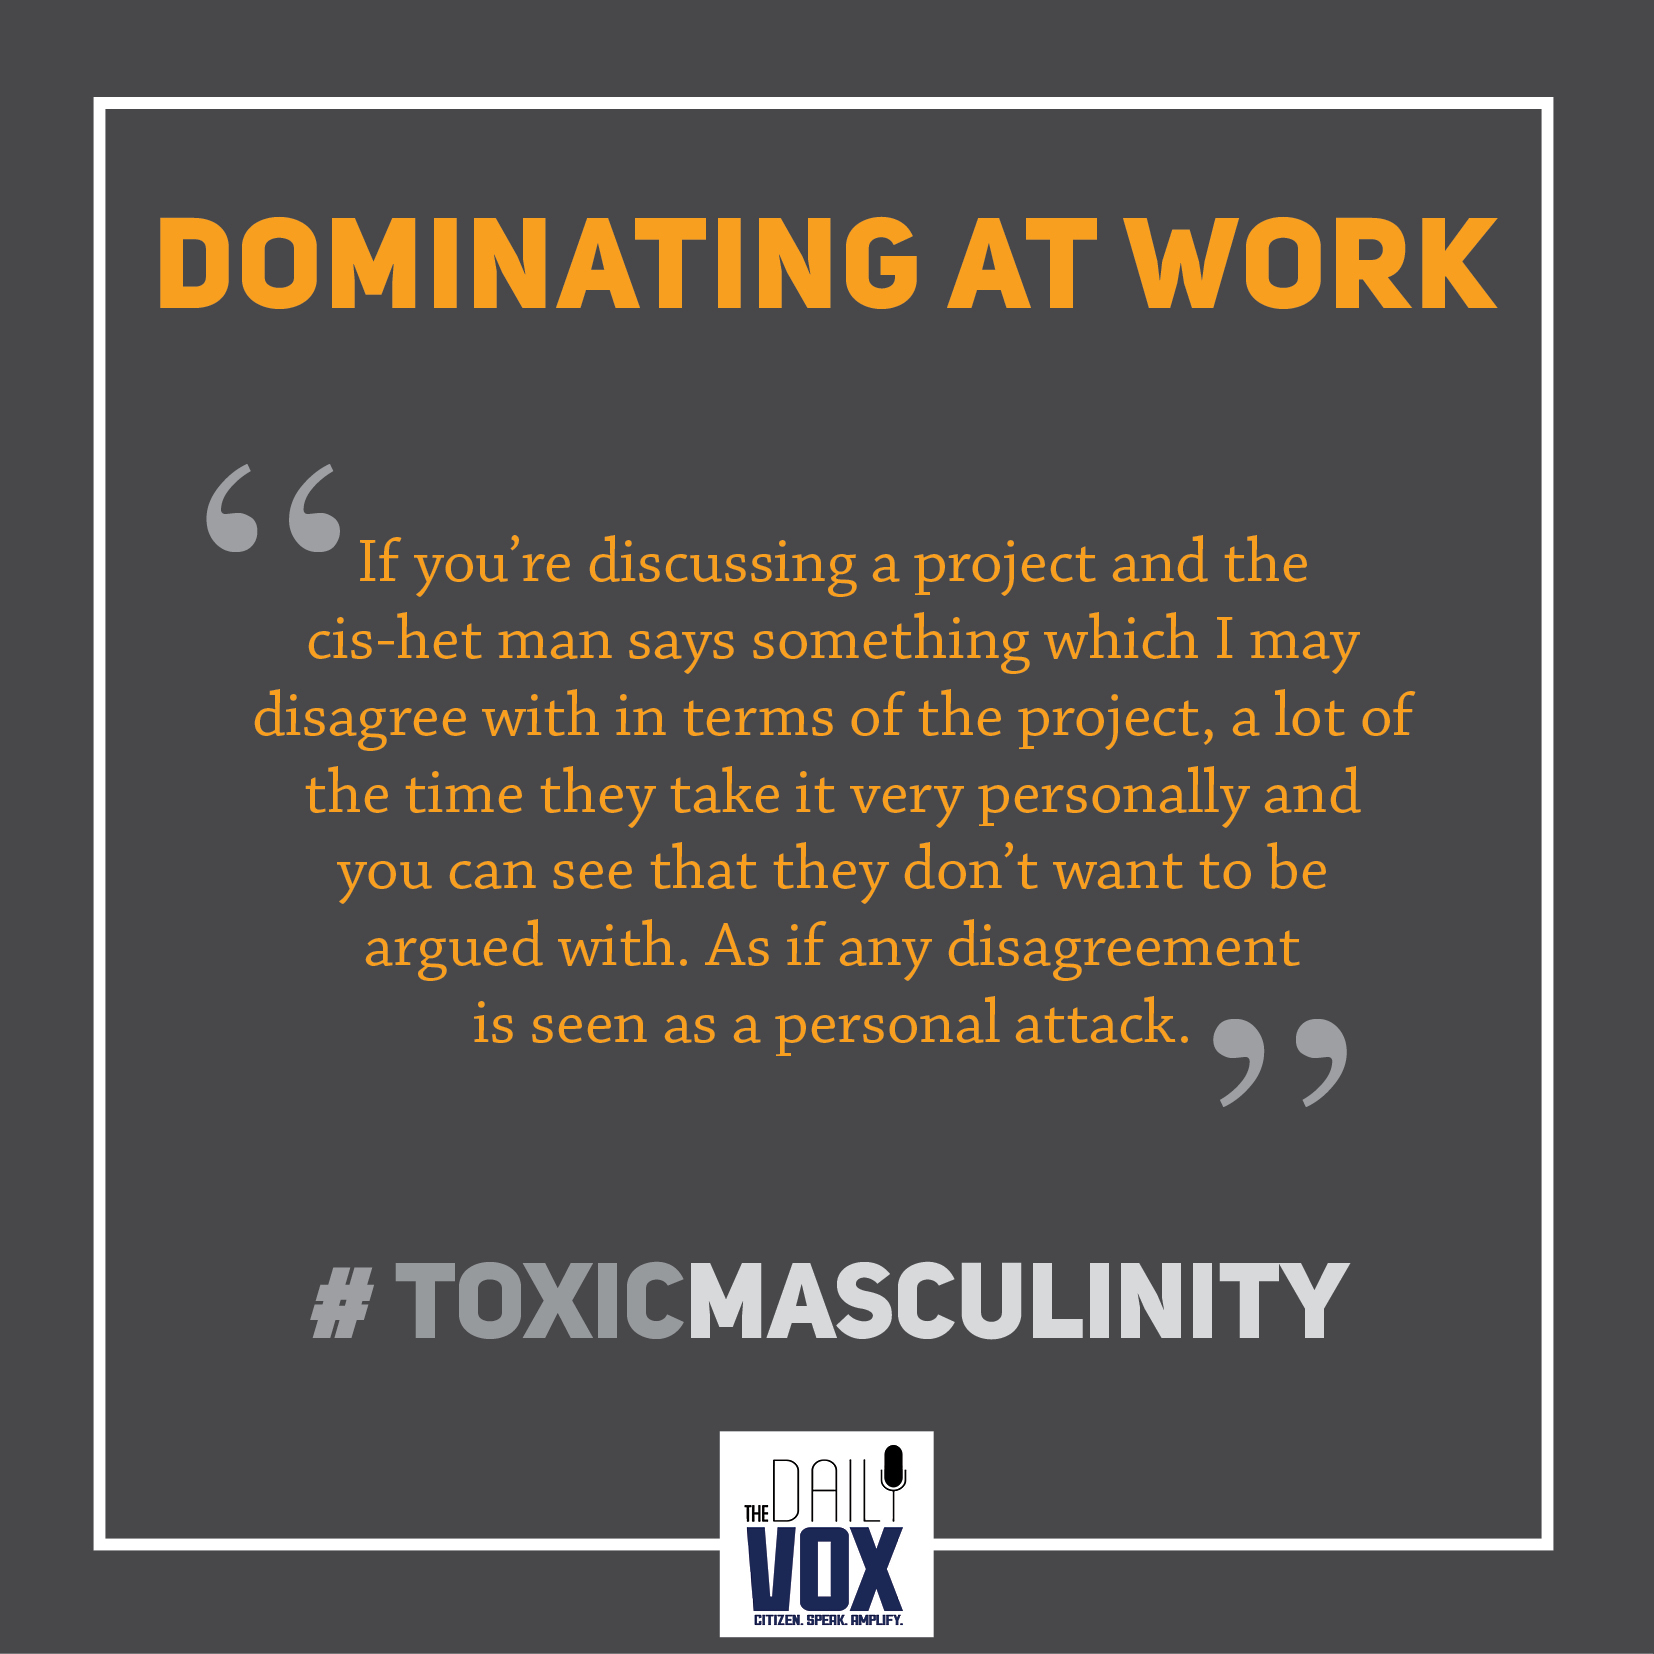 toxic masculinity dominating at work sexism